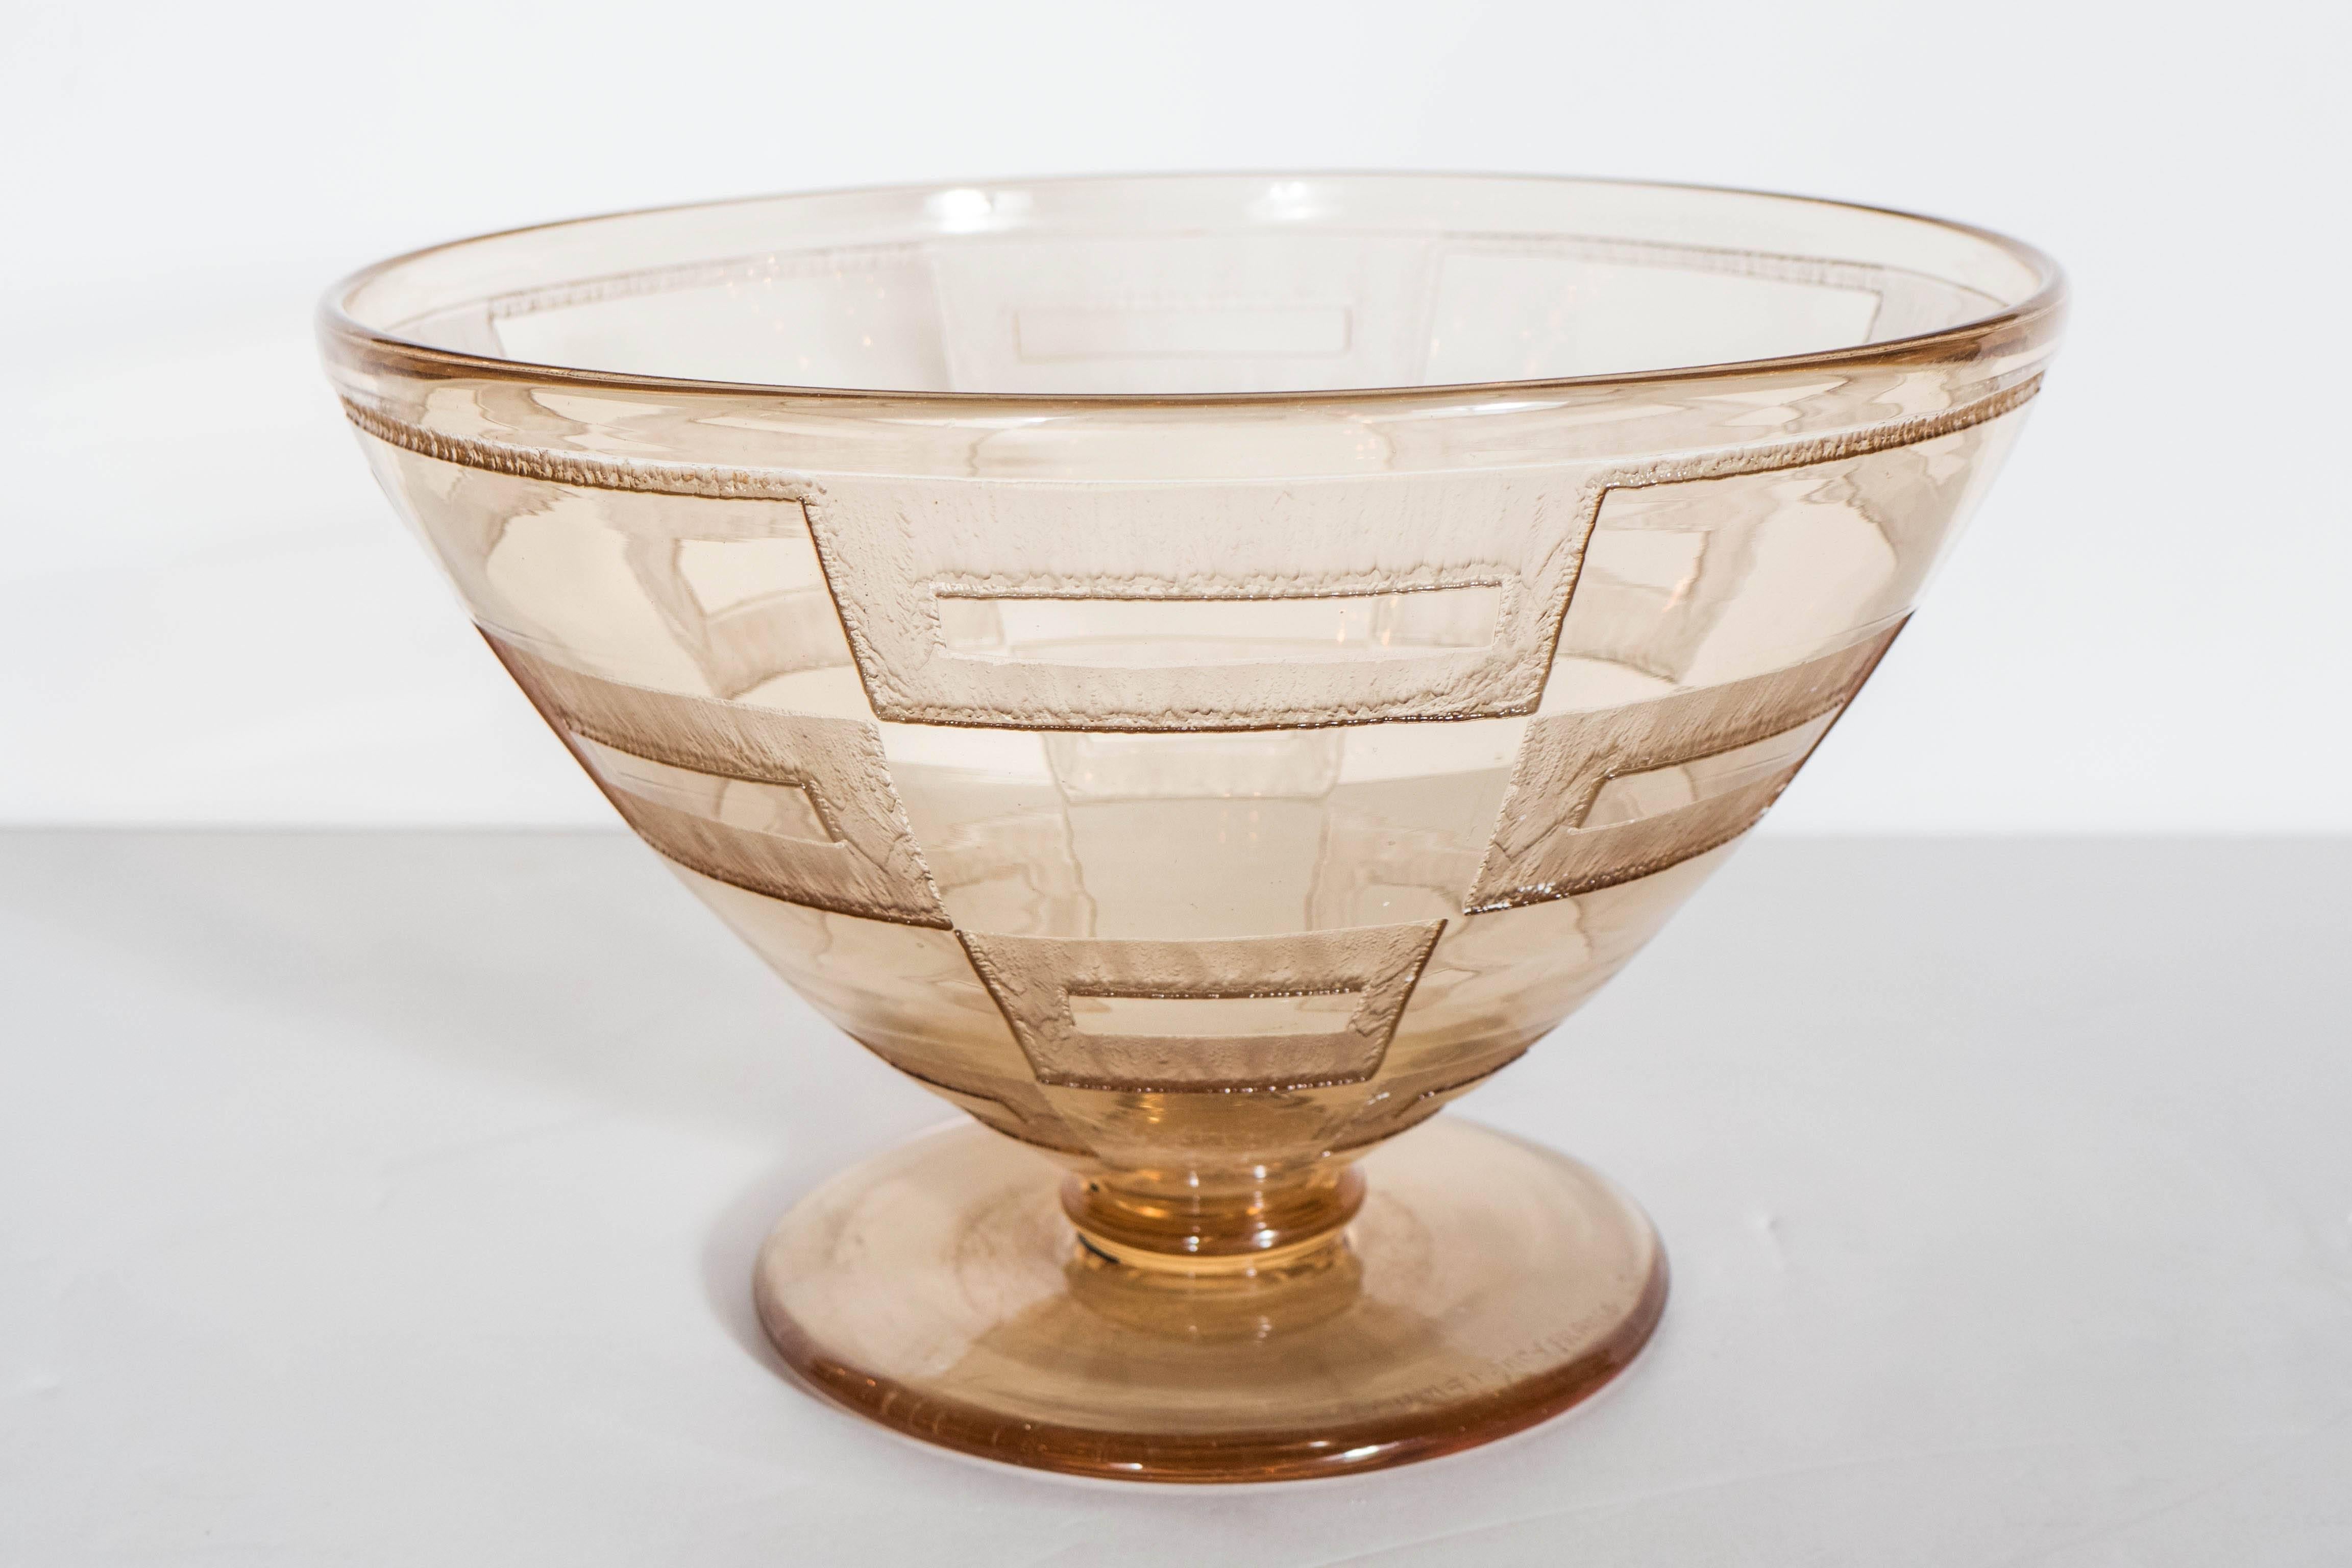 French Exquisite Pair of Art Deco Acid-Etched Glass Footed Bowls by Nancy Daum 